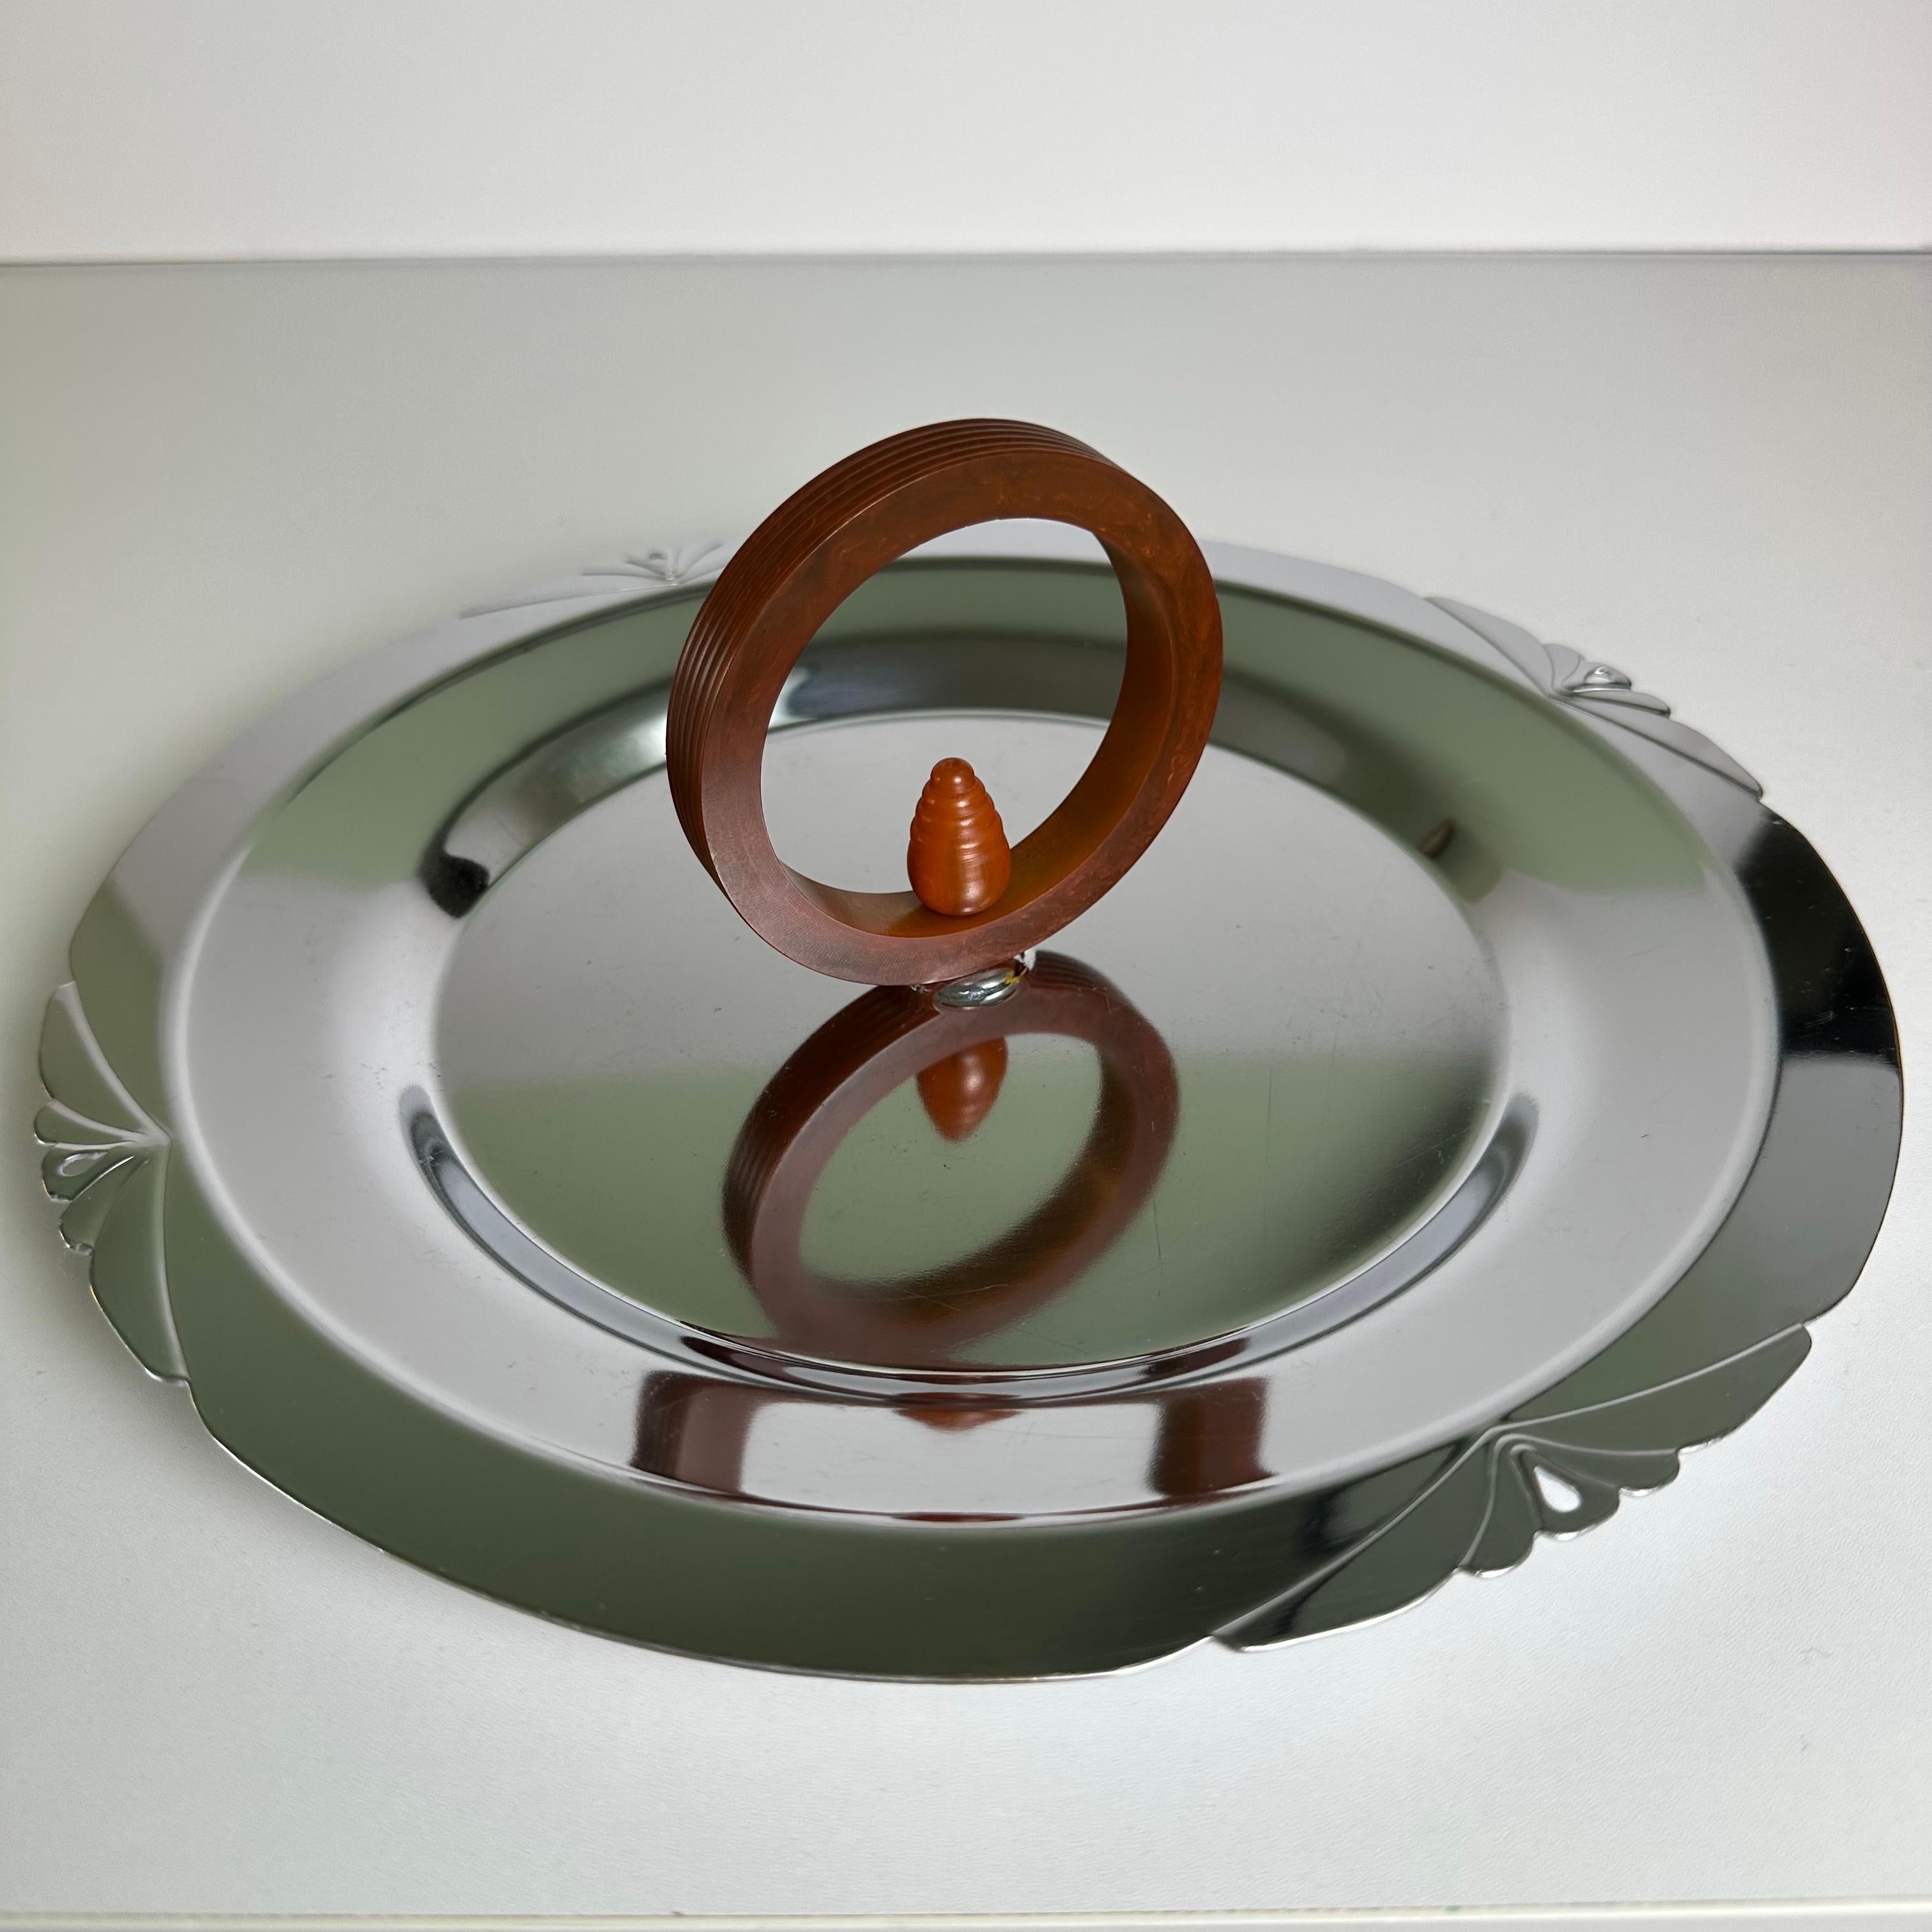 Art Deco chrome plated tray with a Bakelite handle. The round, fluted Bakelite handle is executed in a marbled faux-tortoise or amber color with a beehive or acorn shaped ornament in the middle. Ringed by 4 textured, lotus flower inspired details